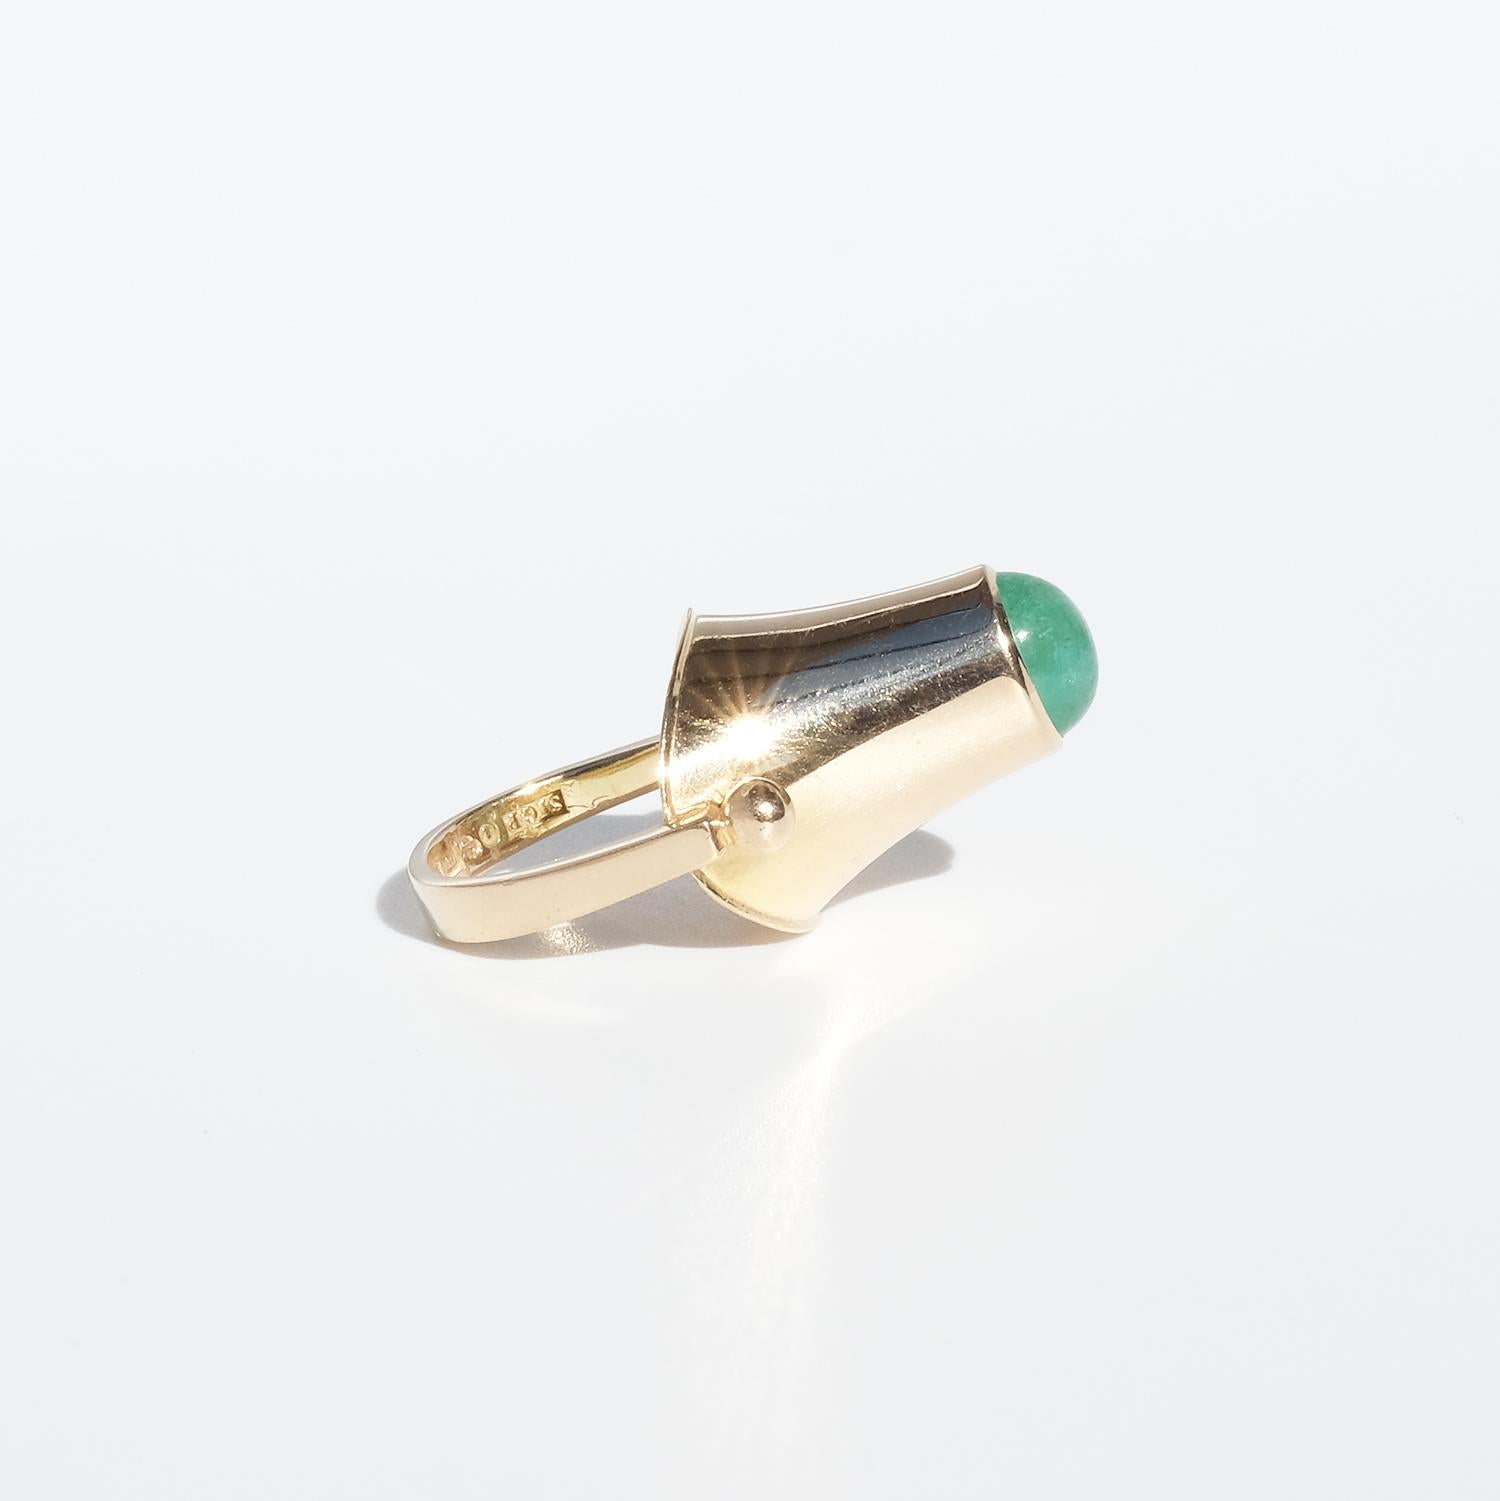 Swedish 18 K Gold Ring with an Emerald Made in 1966, Sigurd Persson 1